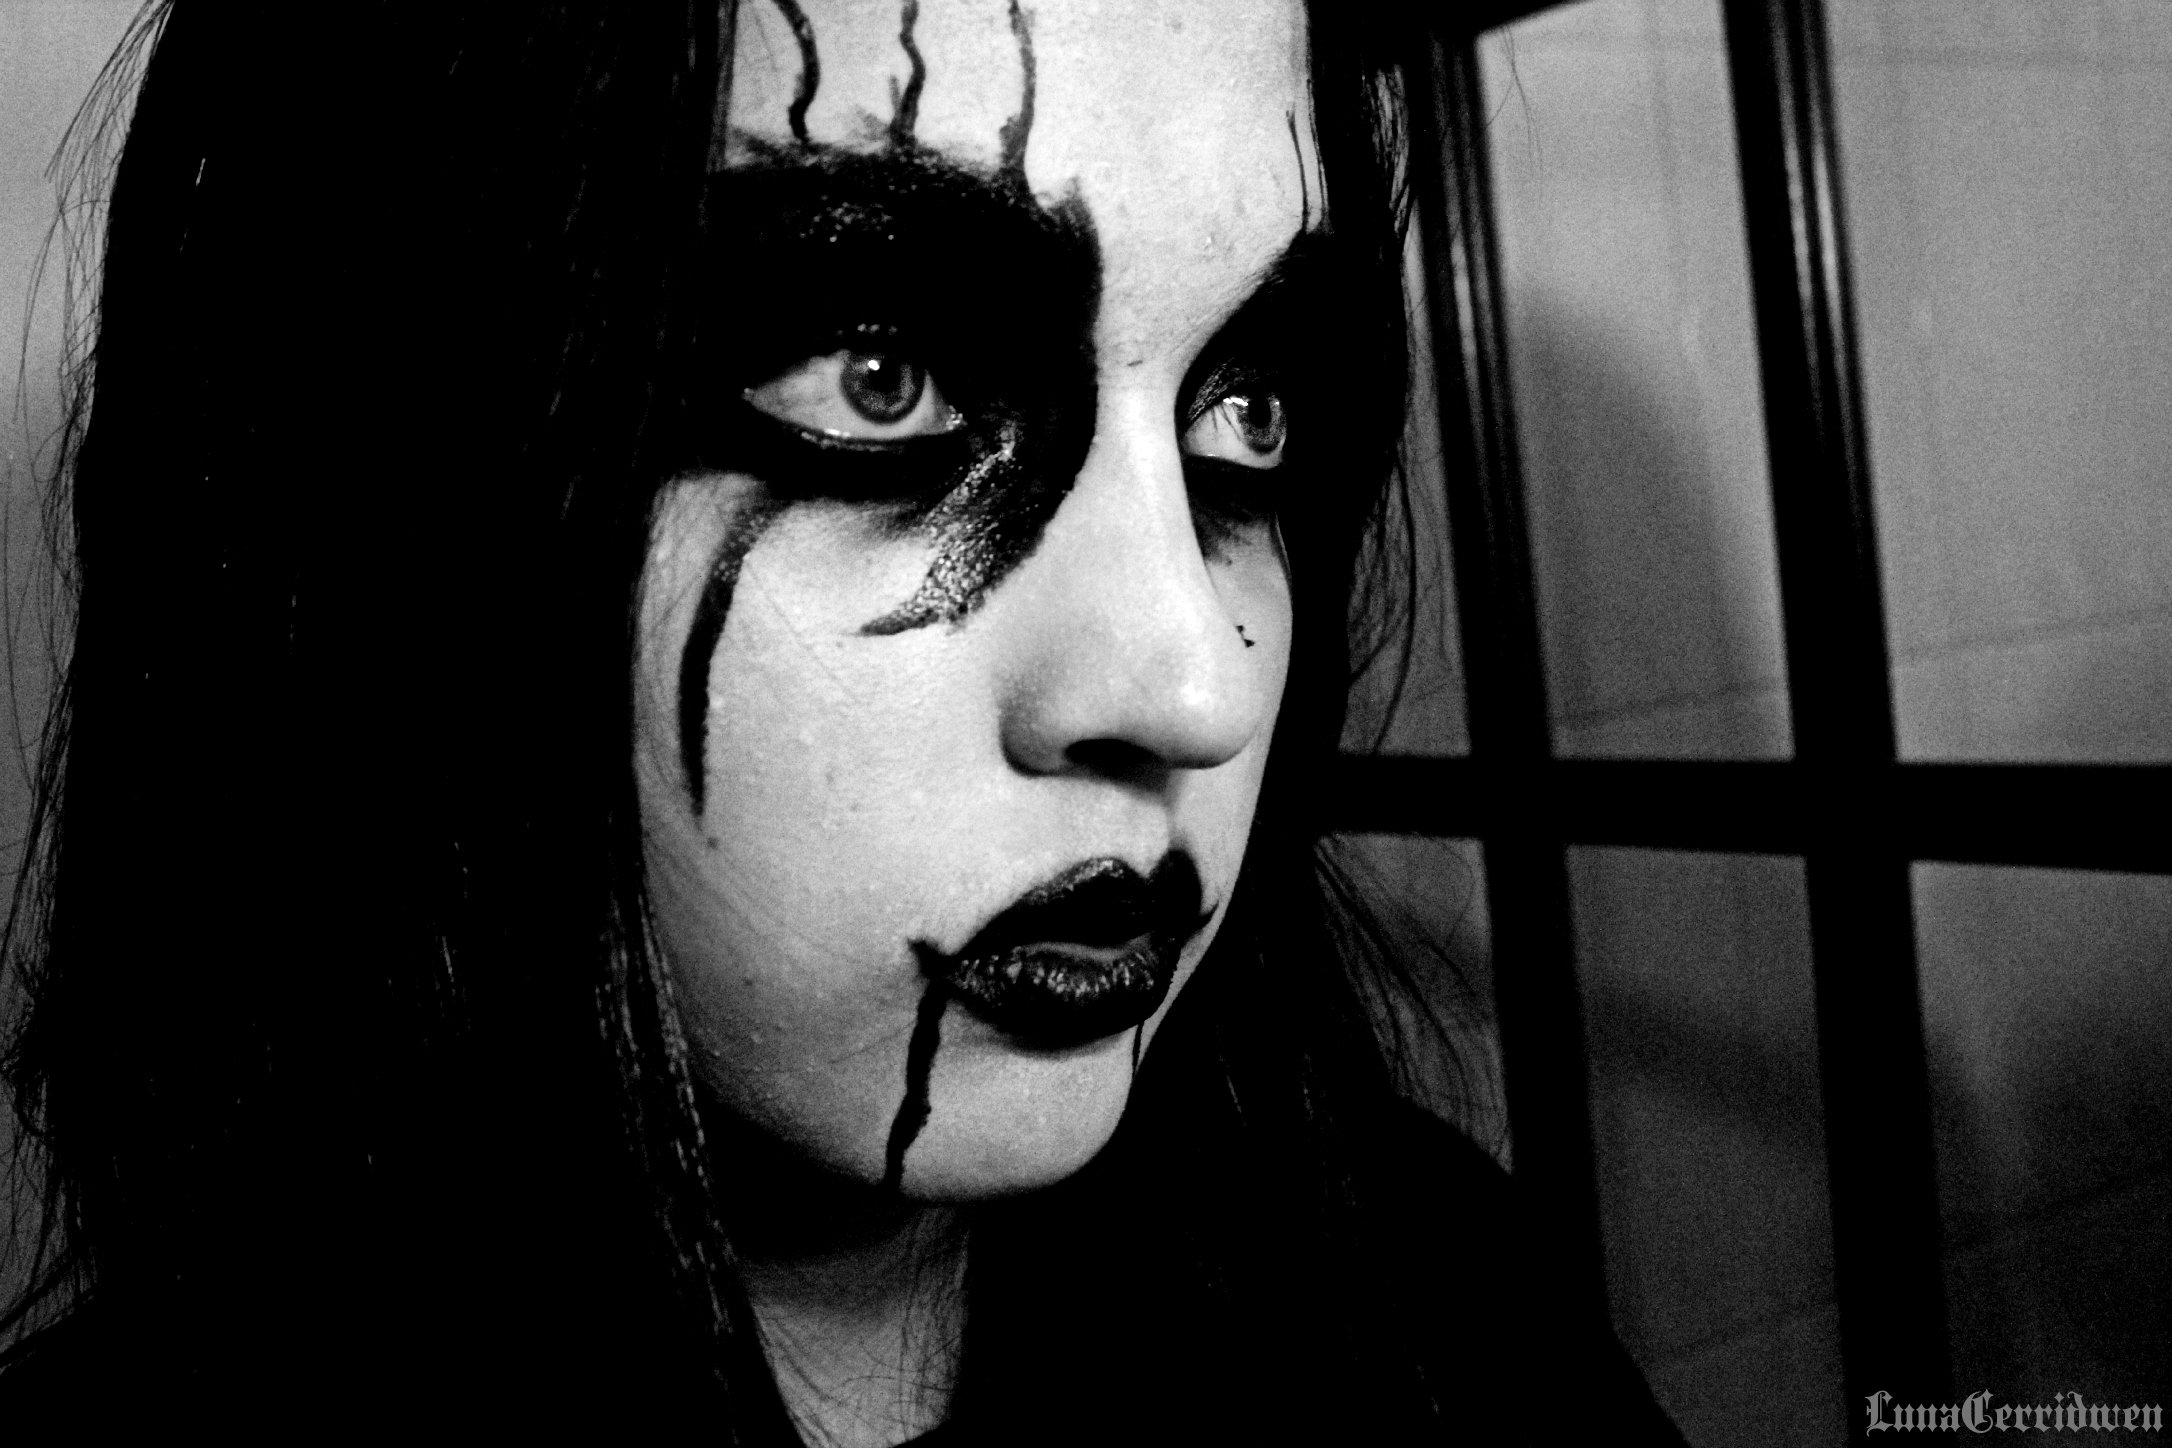 Portrait of a woman with black metal corpse paint in the art style